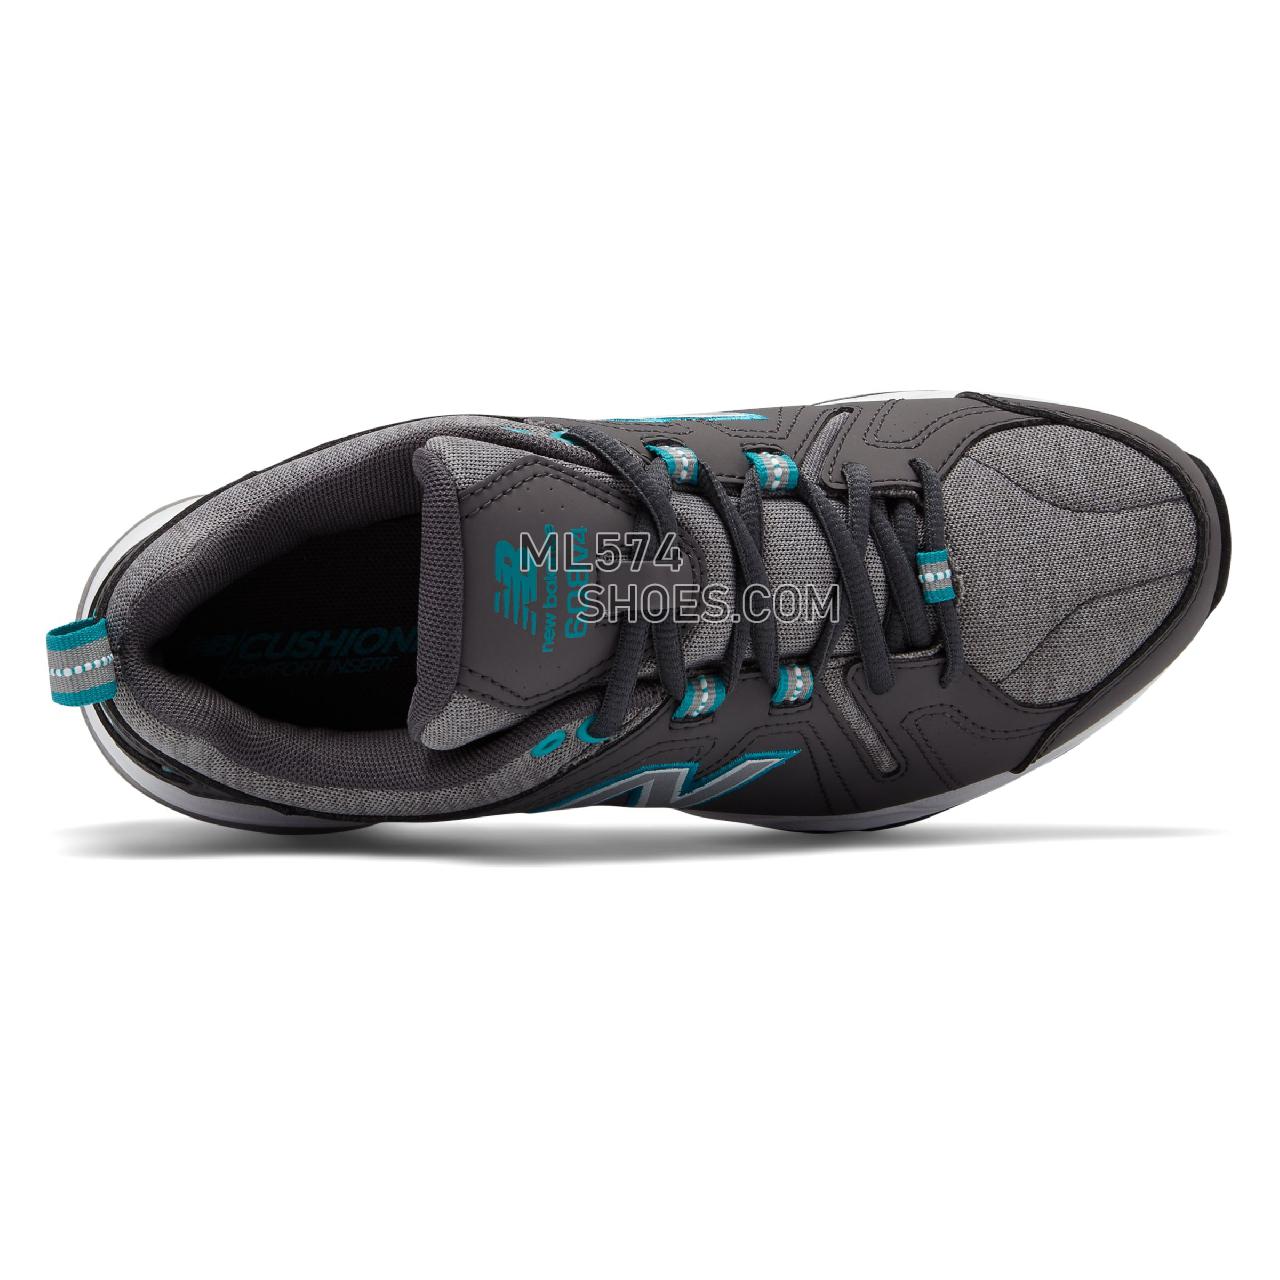 New Balance Womens 608v4 - Women's 608 - X-training Grey with Teal - WX608HH4